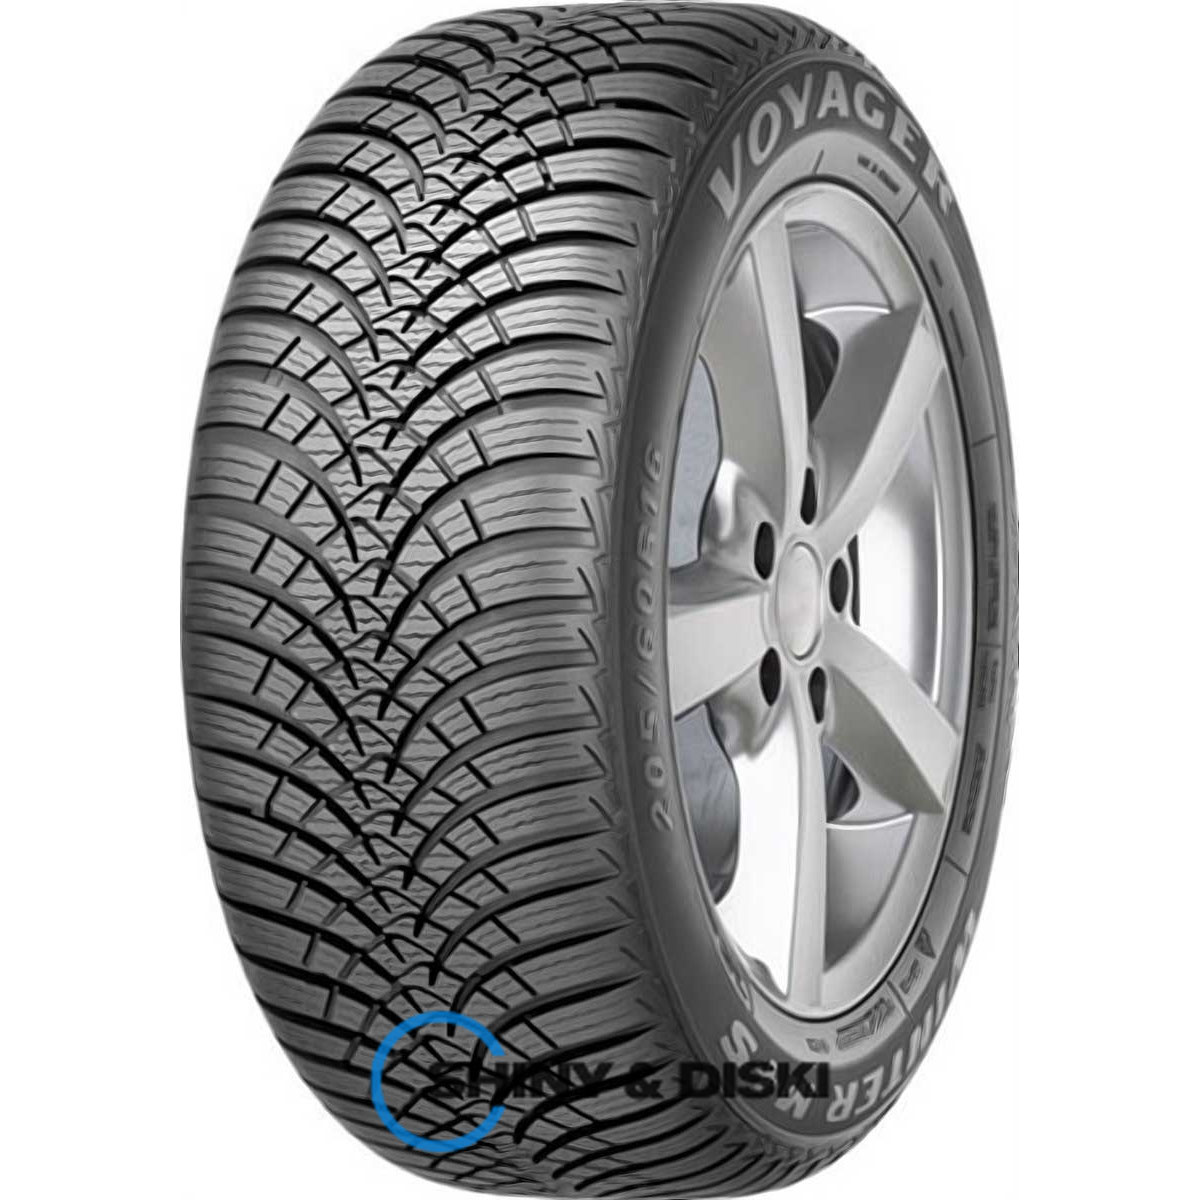 voyager winter 215/65 r15 96h